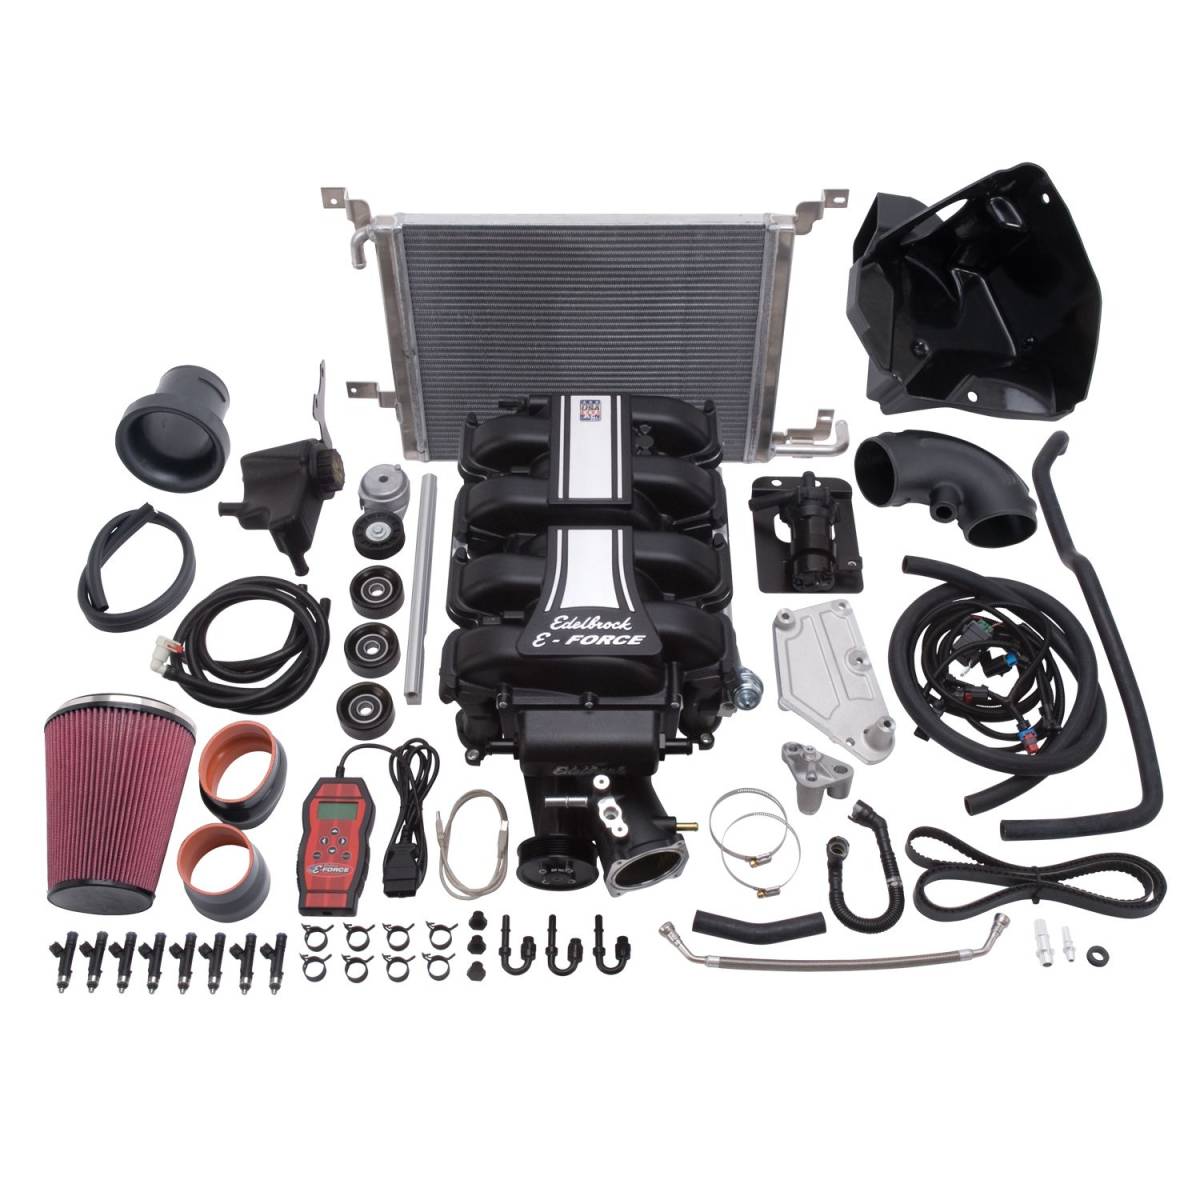 Edelbrock - Ford Mustang Coyote 5.0L 2011-2014 Edelbrock Stage 2 Complete Supercharger Kit With Tune - Image 1